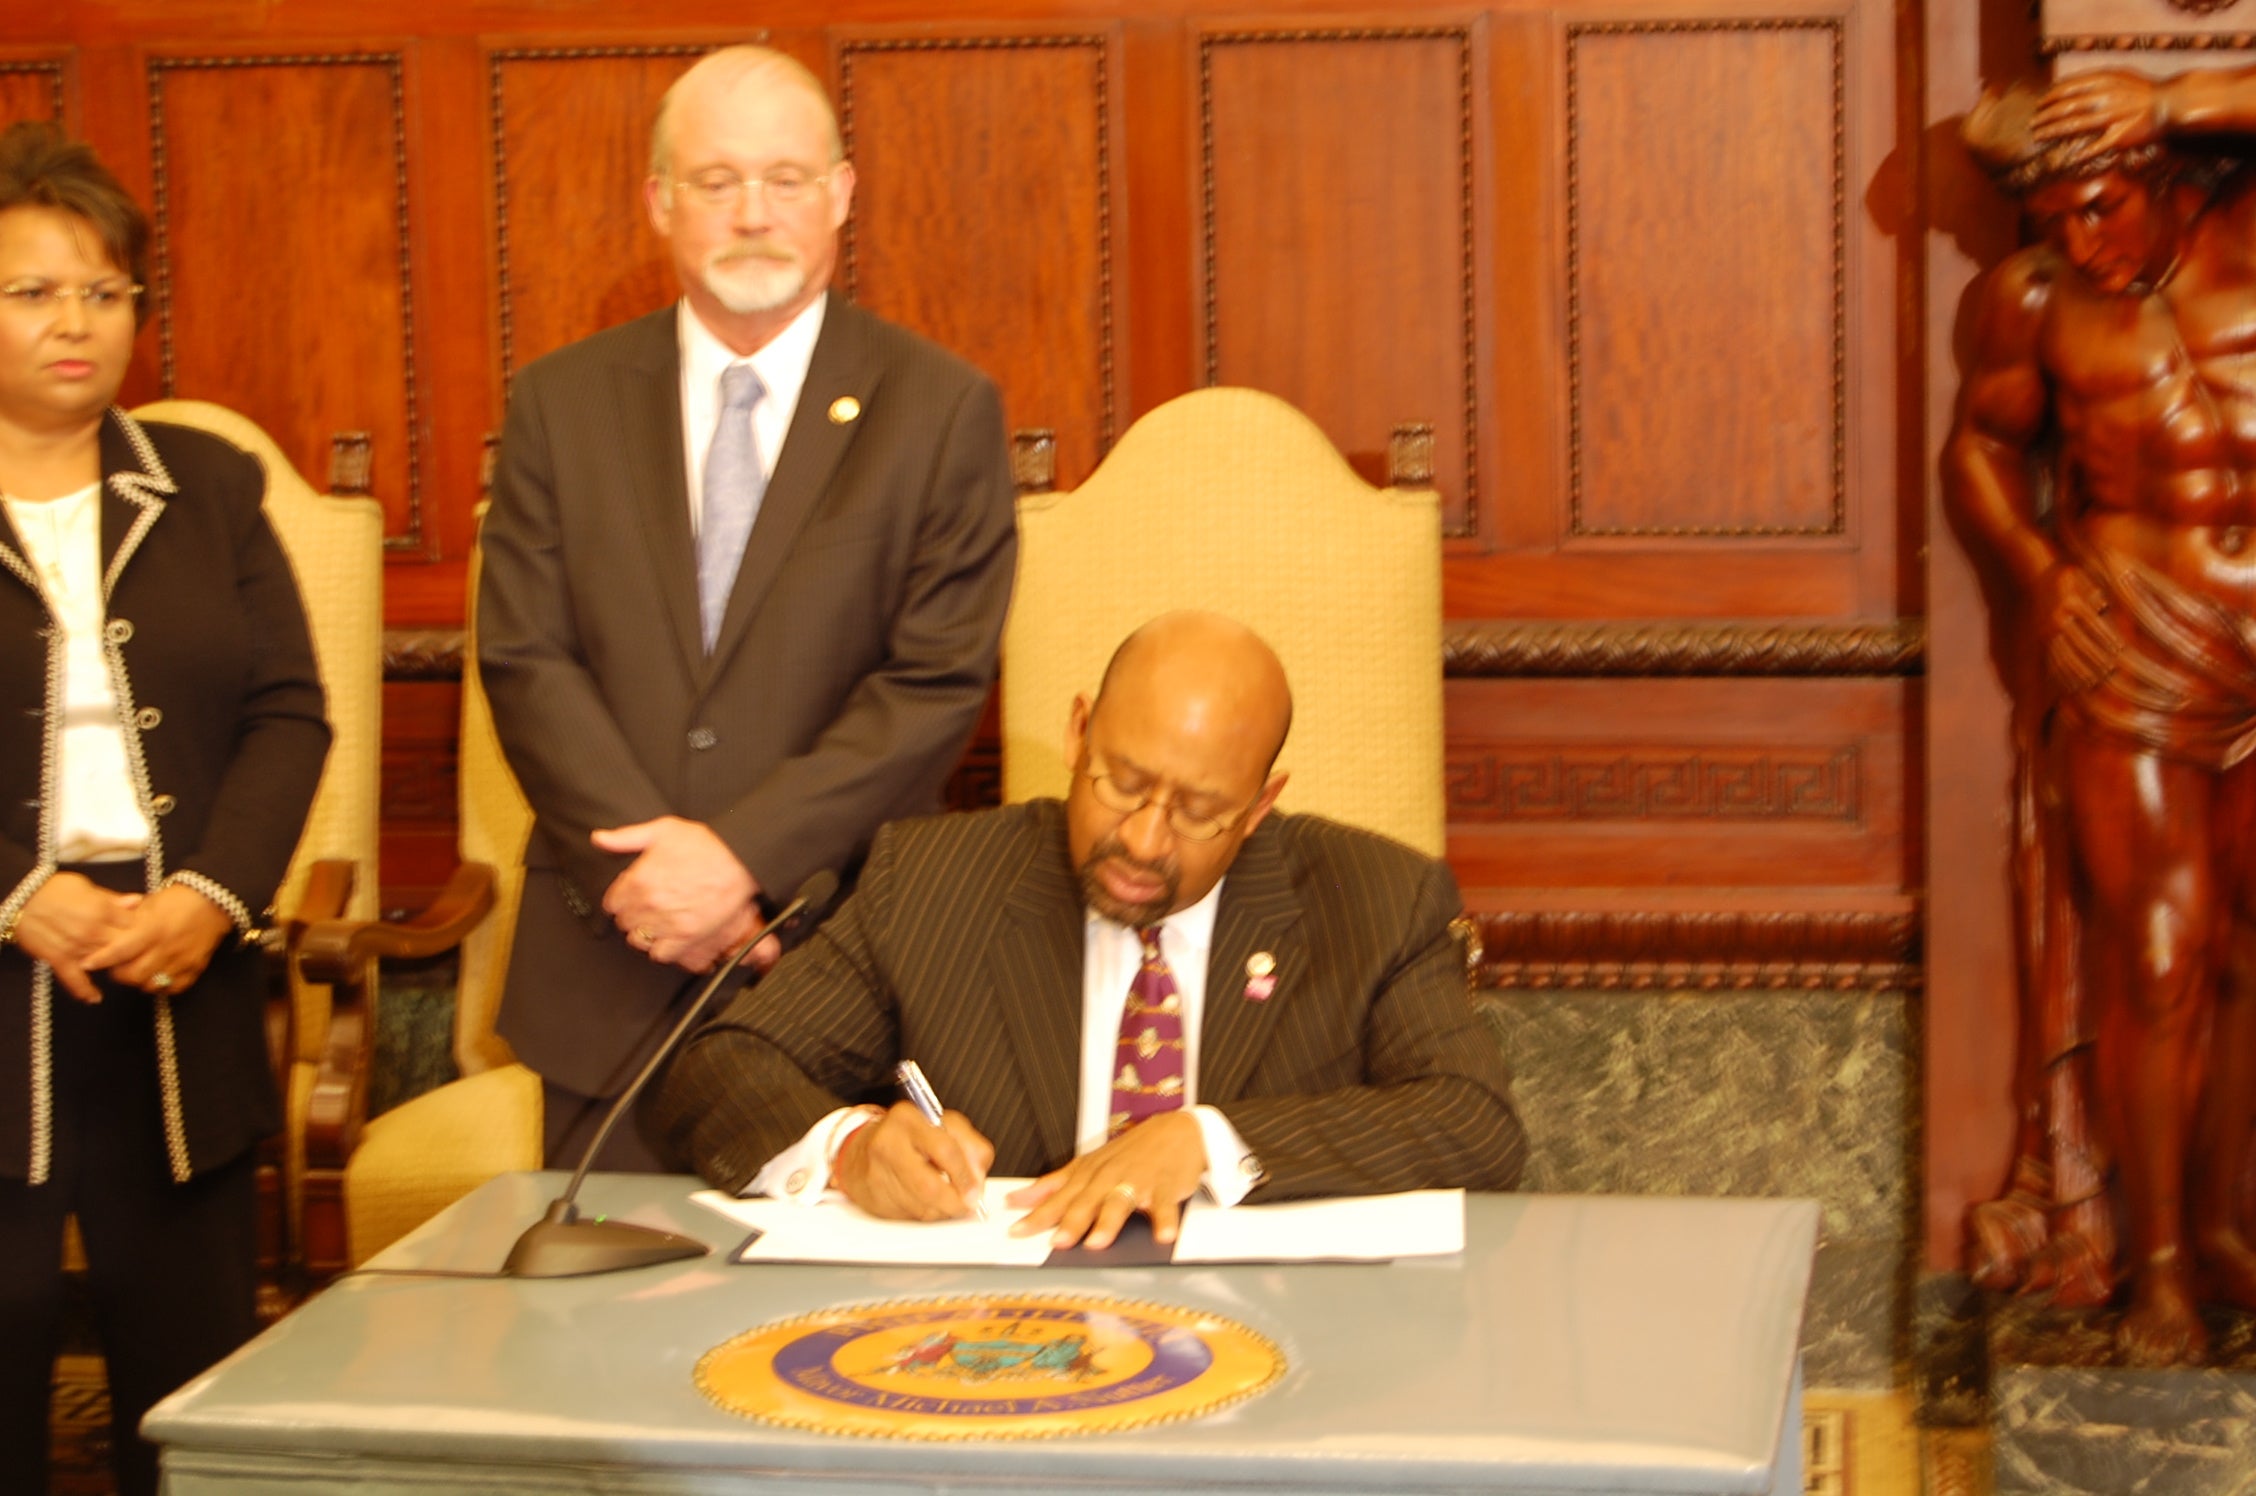  Philadelphia Mayor Michael Nutter signs sick leave bill as Councilman Greenlee stands by (Tom MacDonald/WHYY) 